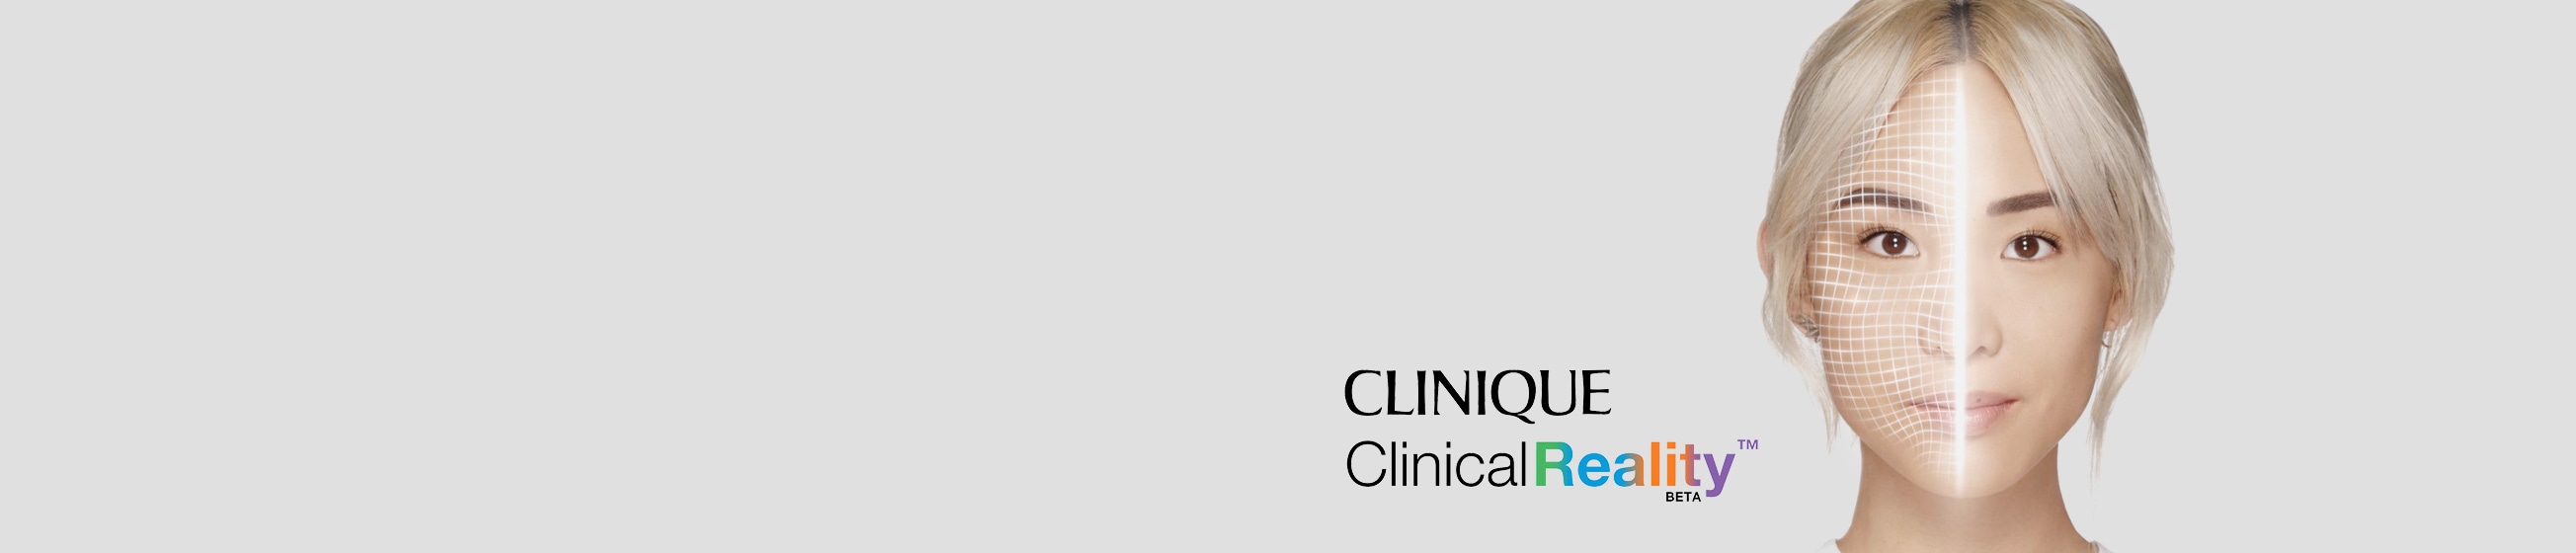 Find your Clinique iD™